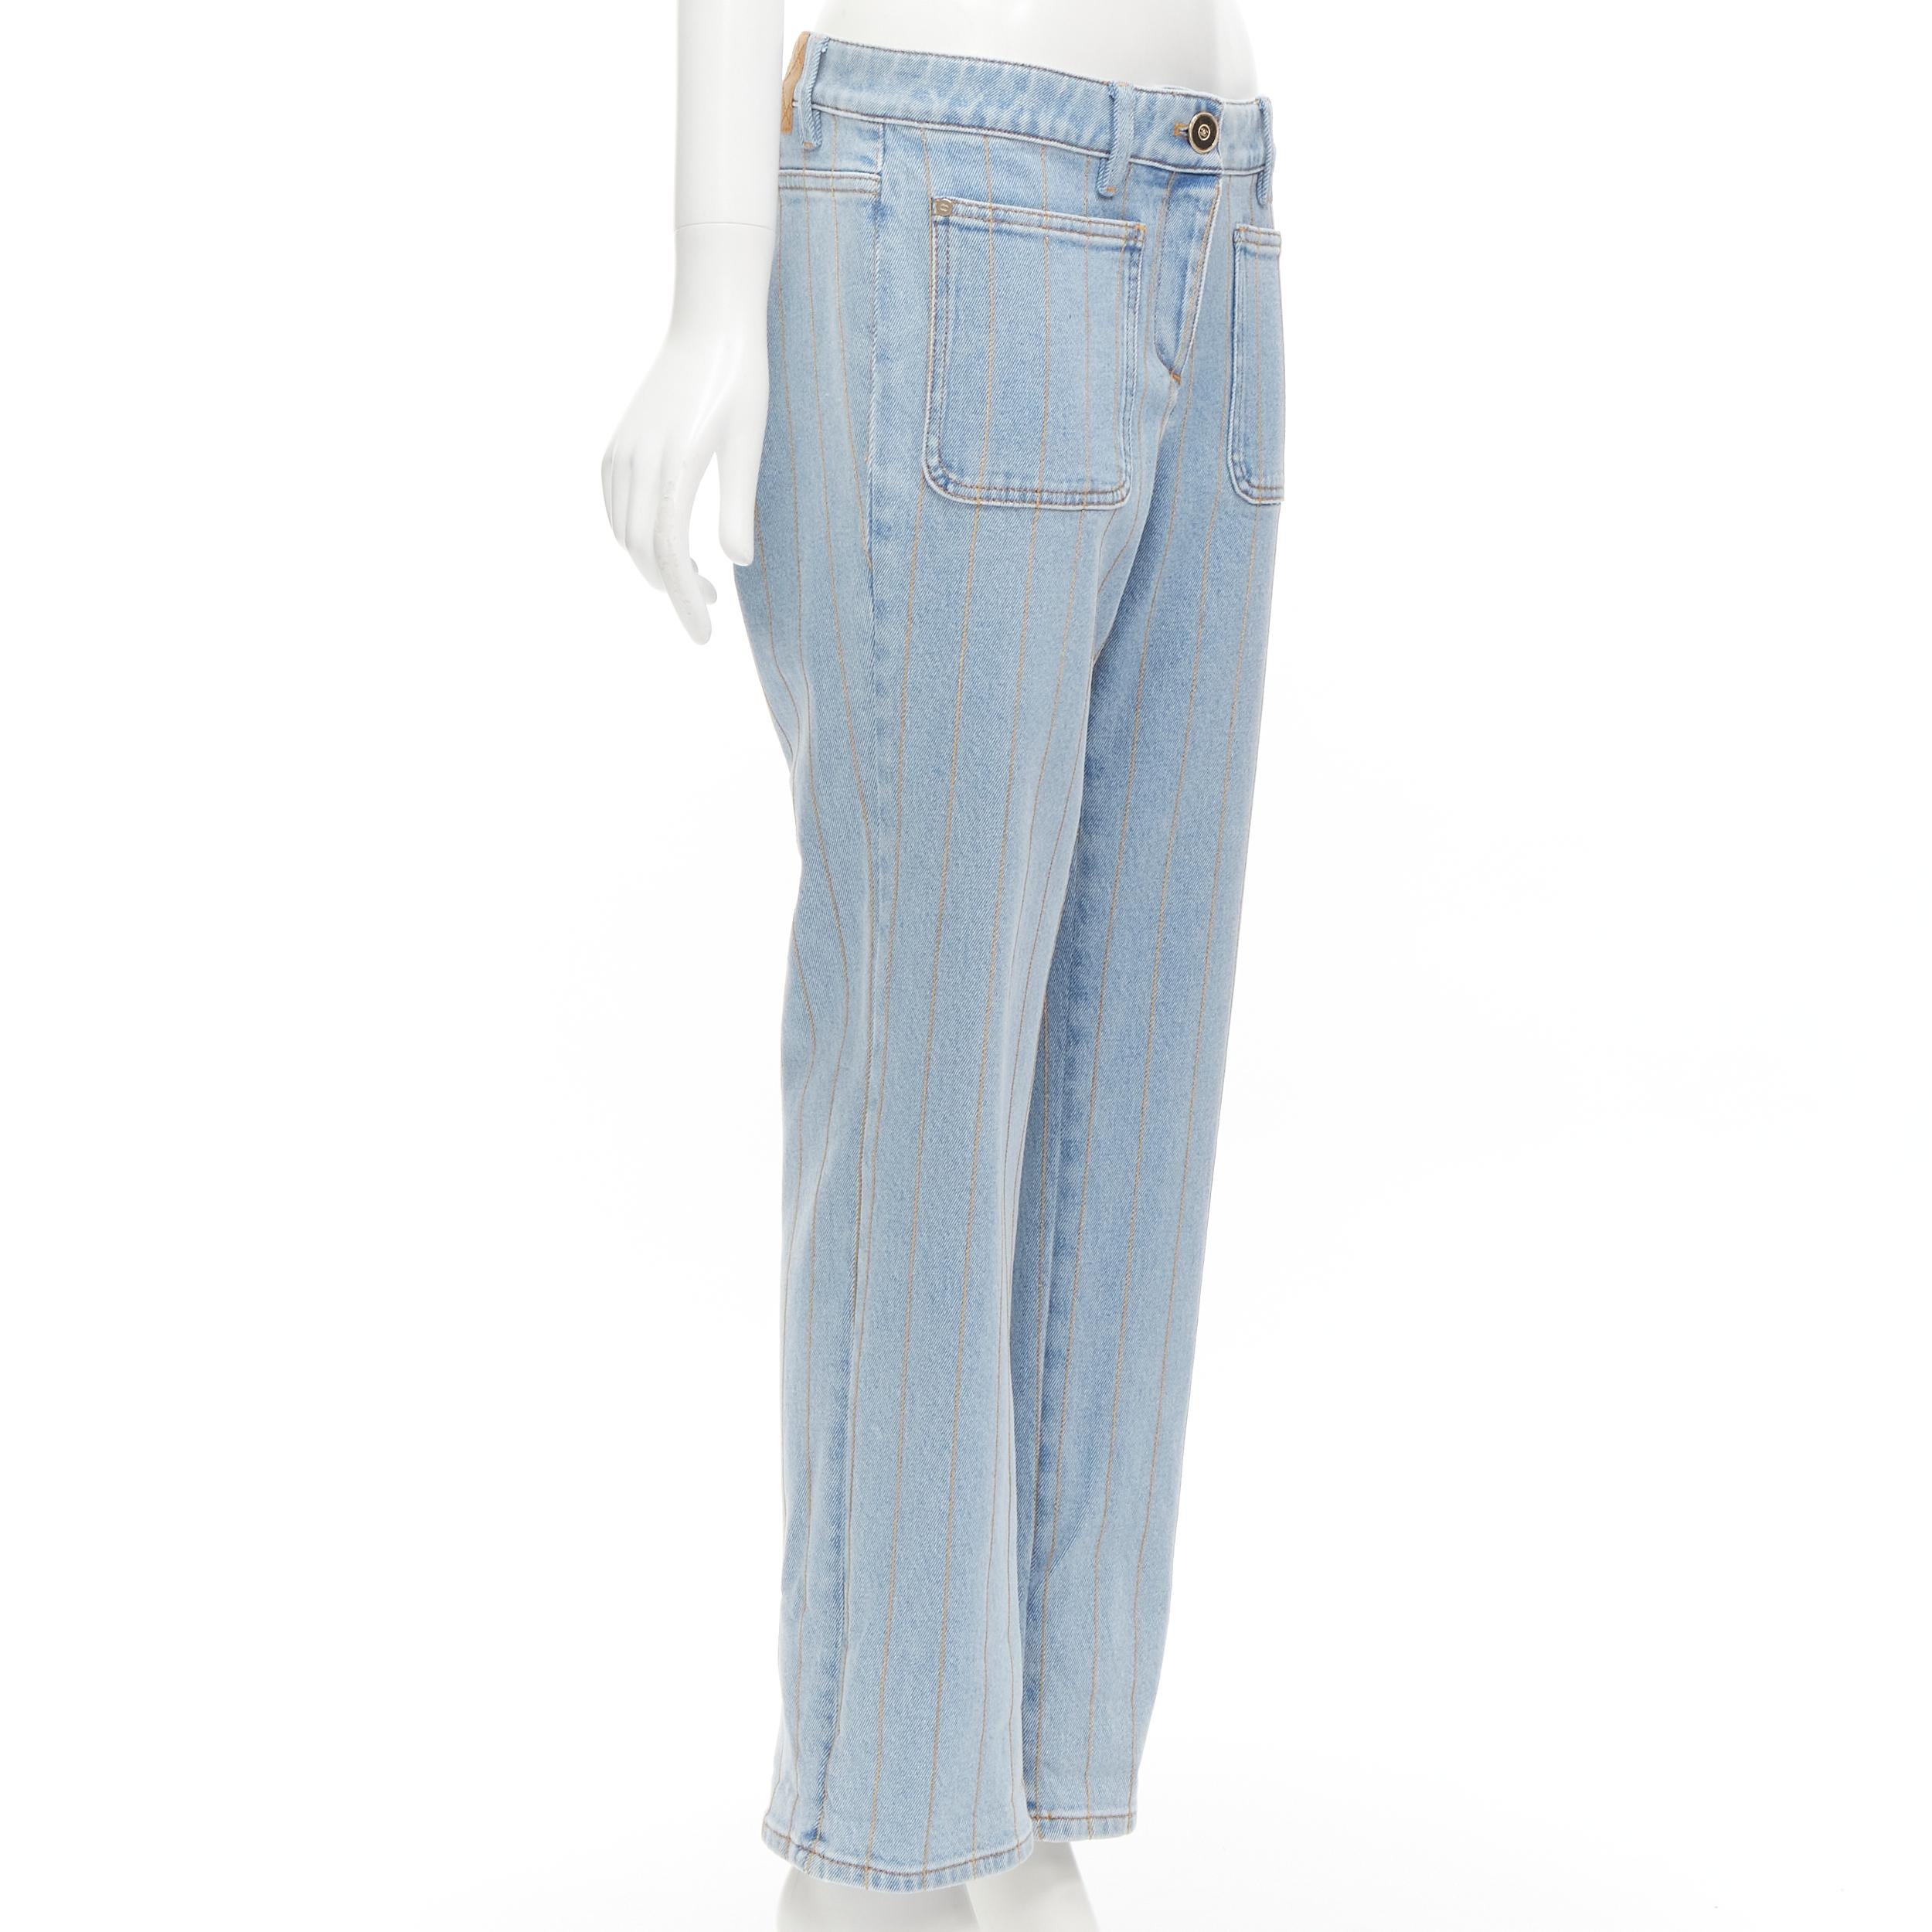 normandy rose jeans